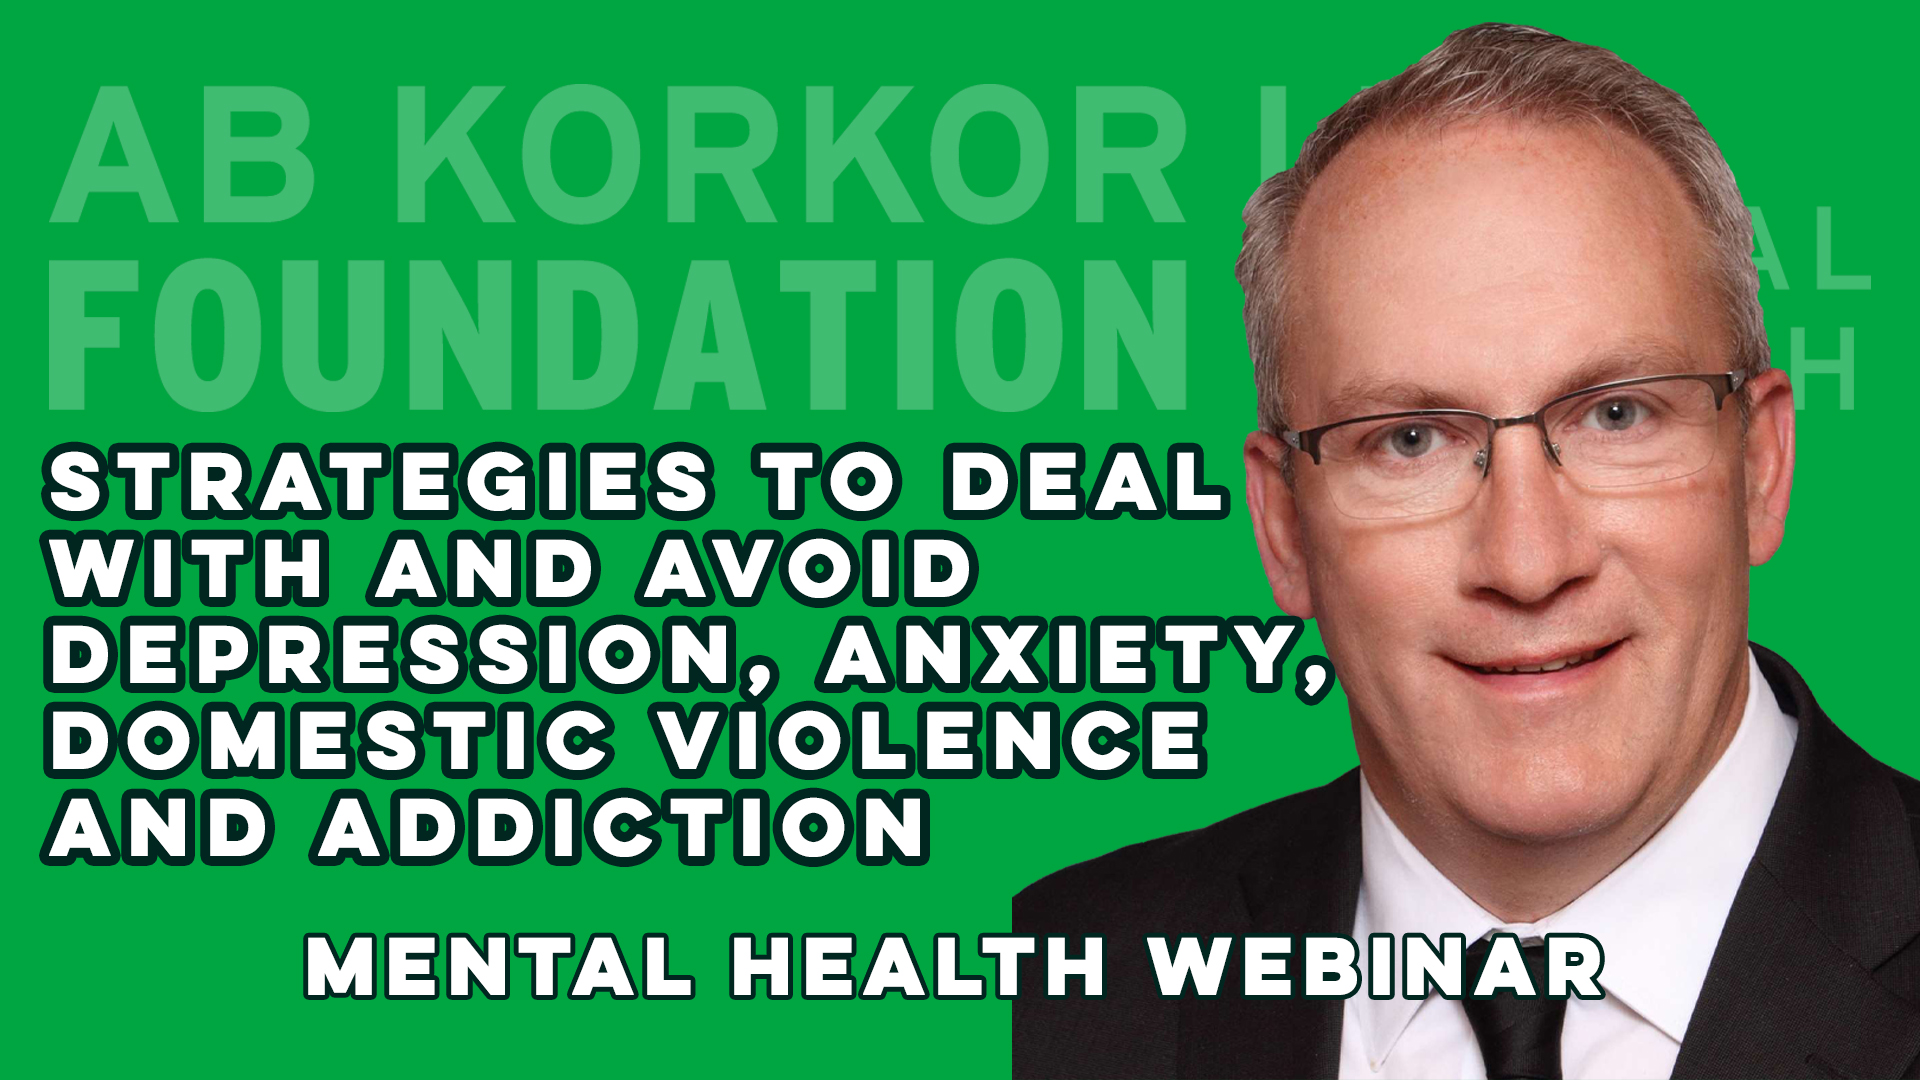 Strategies to Deal with and Avoid Depression, Anxiety, Domestic Violence and Addiction - Jon Lehrmann - Mental Health Webinar